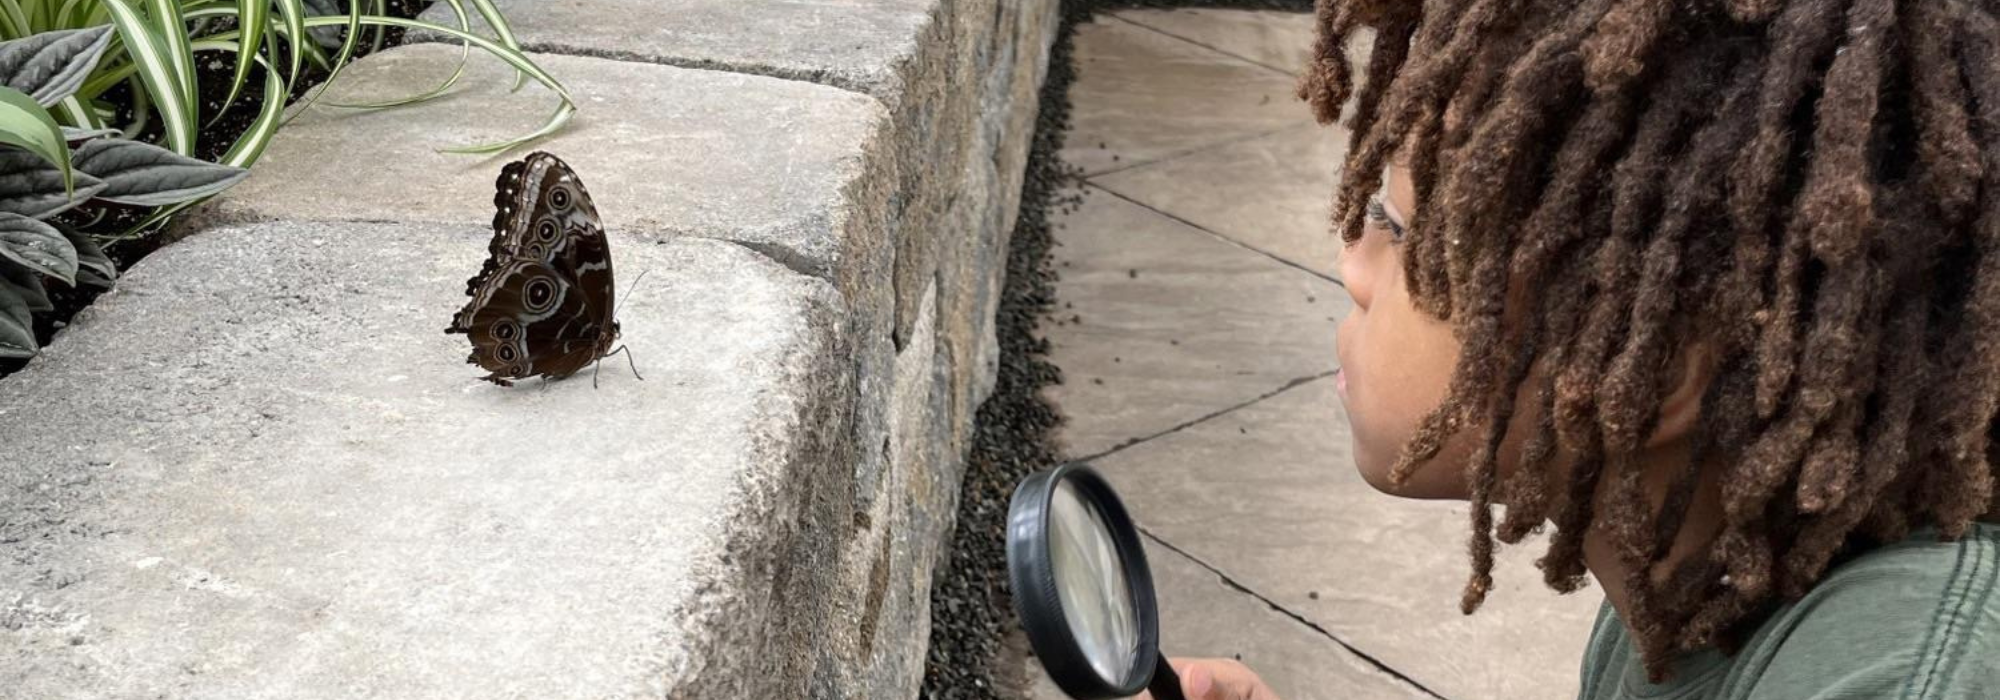 image of a student looking at a butterfly with a magnifying glass